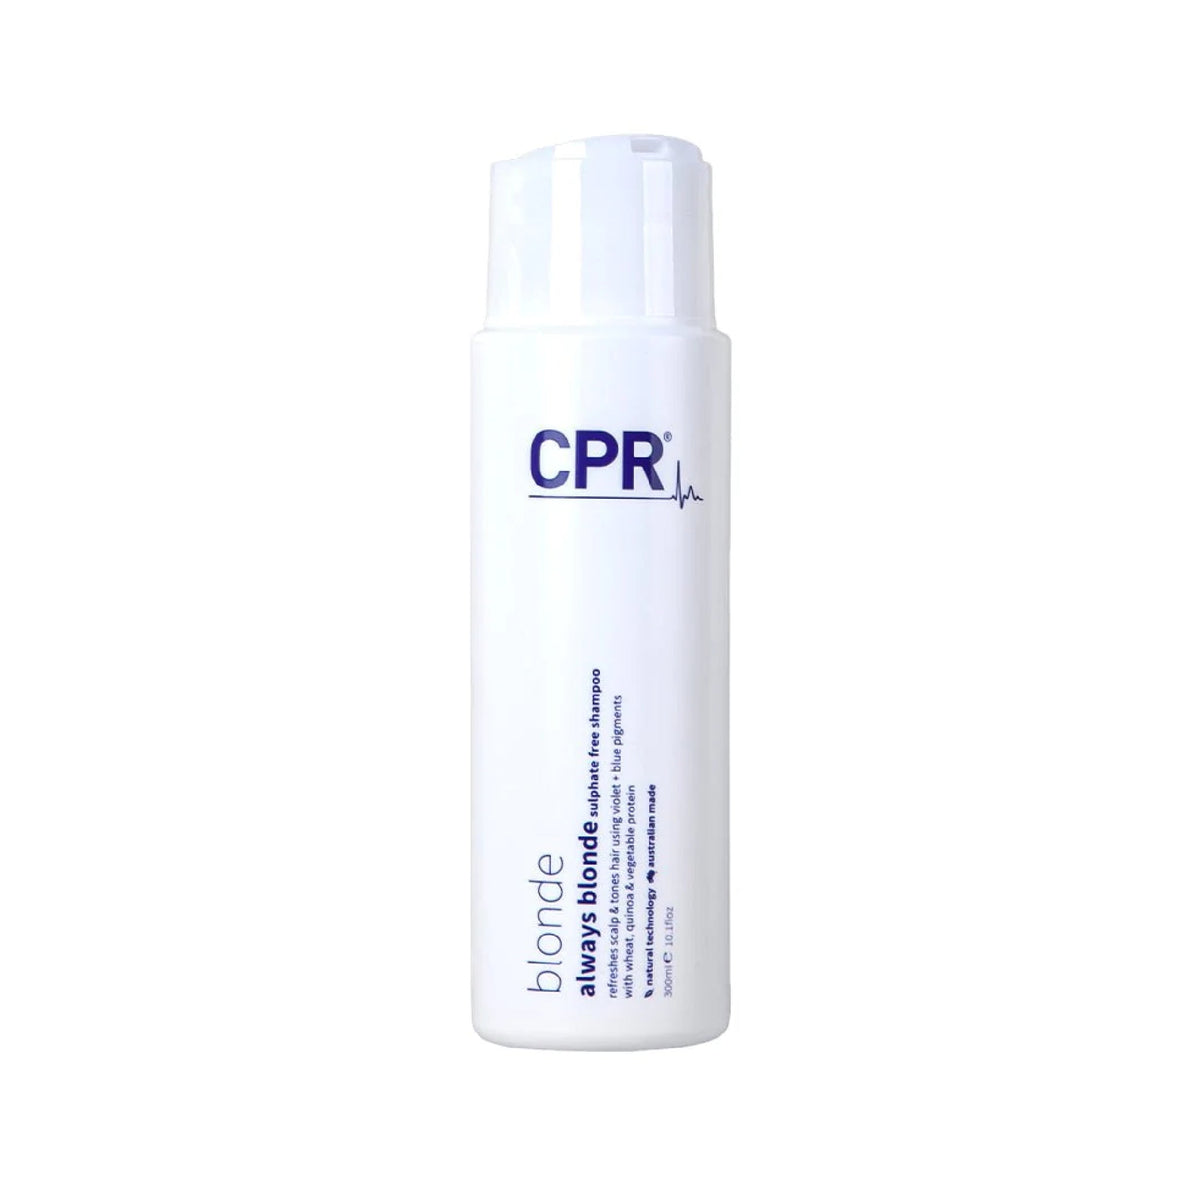 Vitafive CPR Always Blonde Shampoo - Haircare Superstore